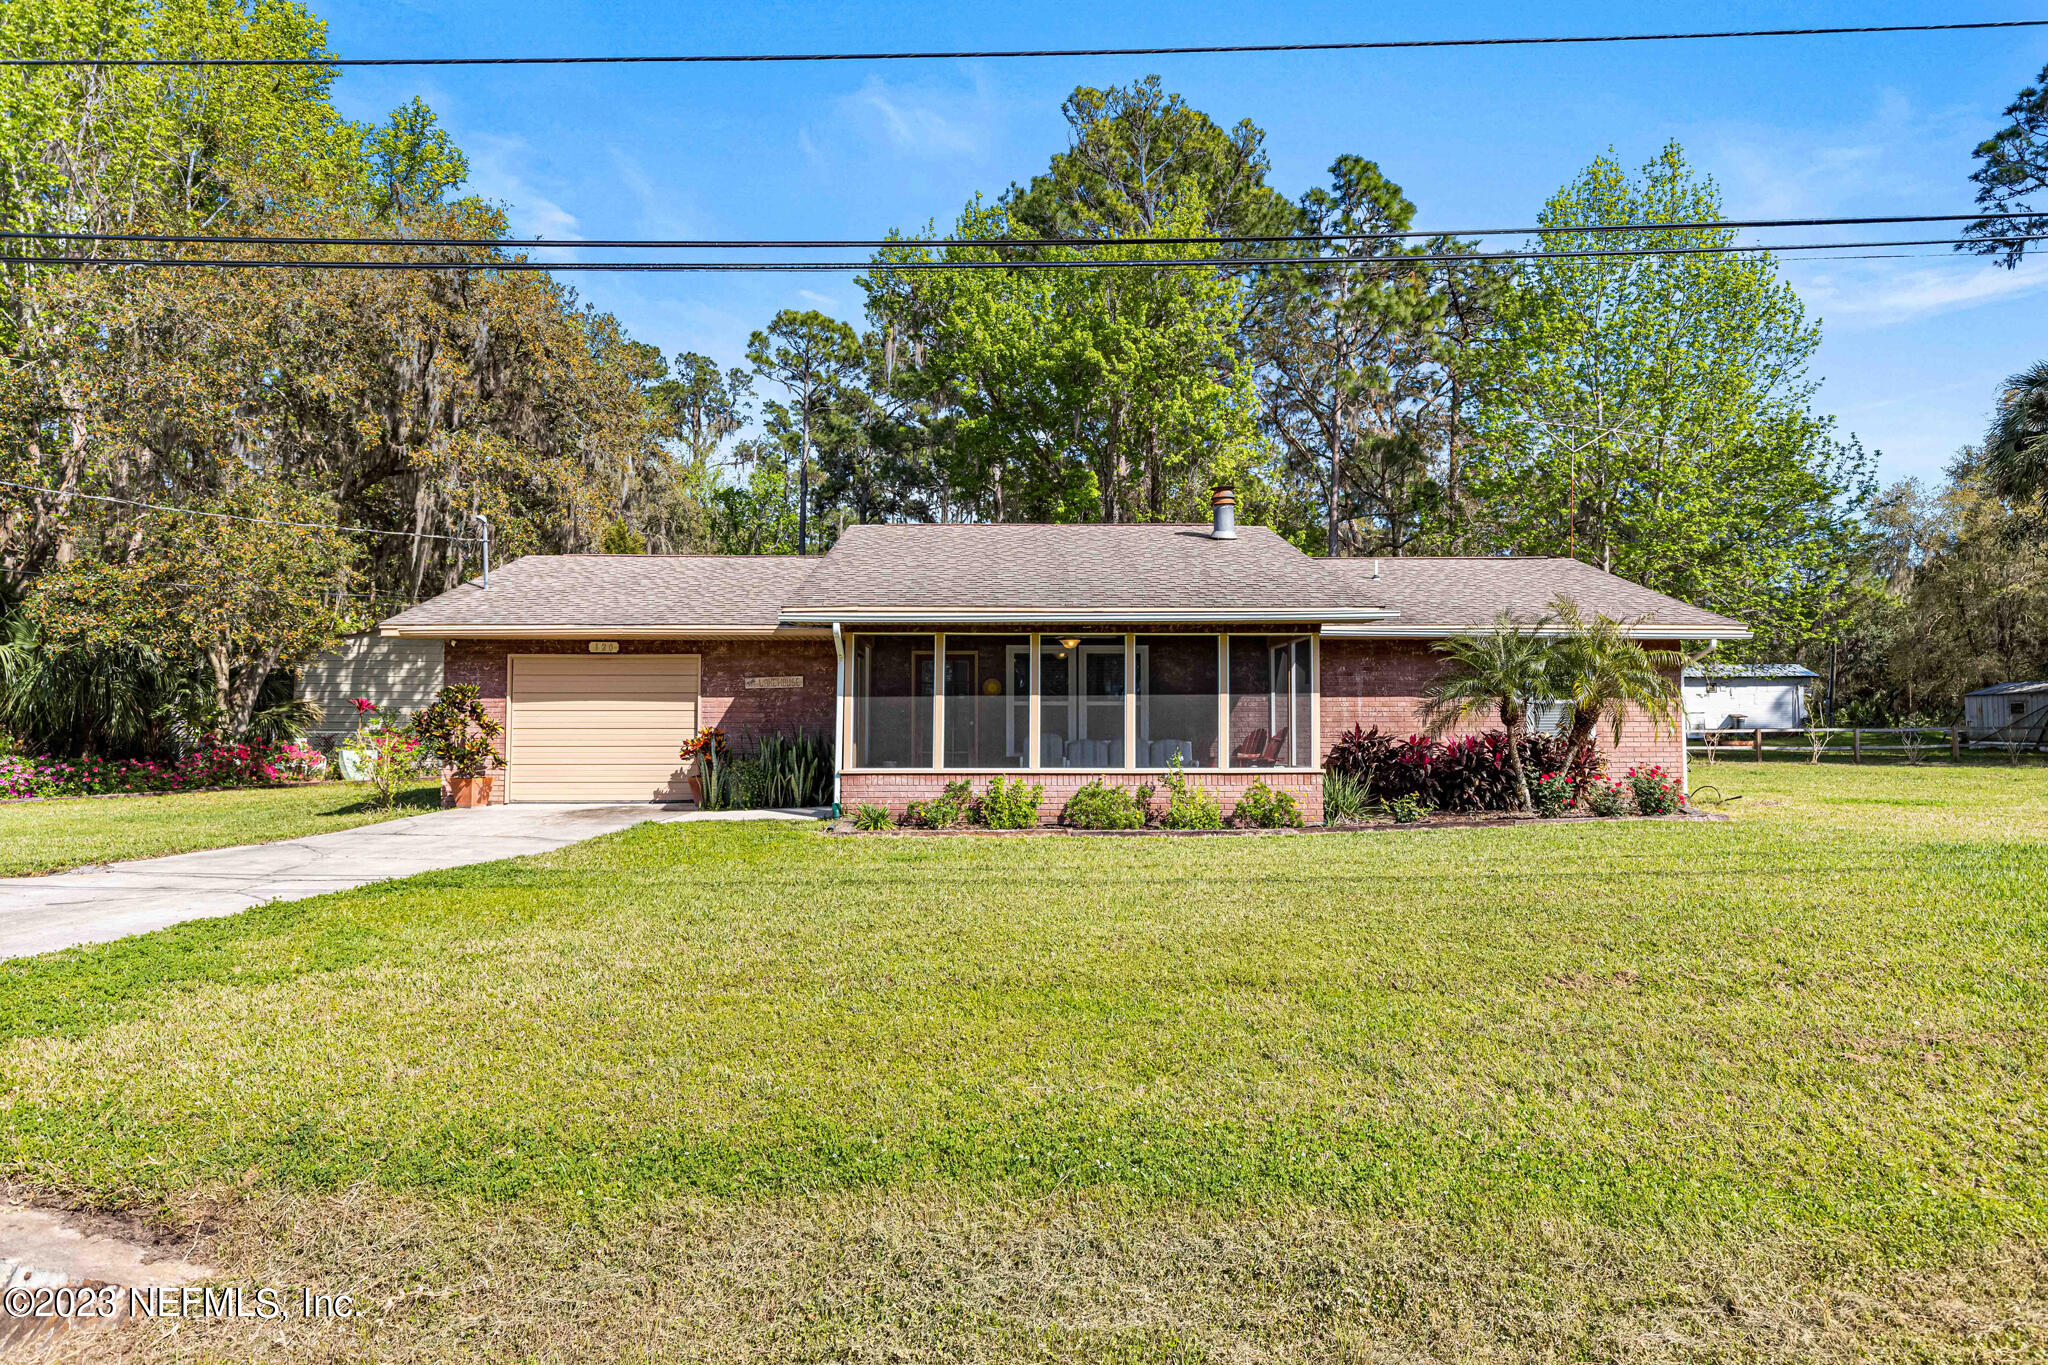 Georgetown, FL home for sale located at 120 PALM Drive, Georgetown, FL 32139